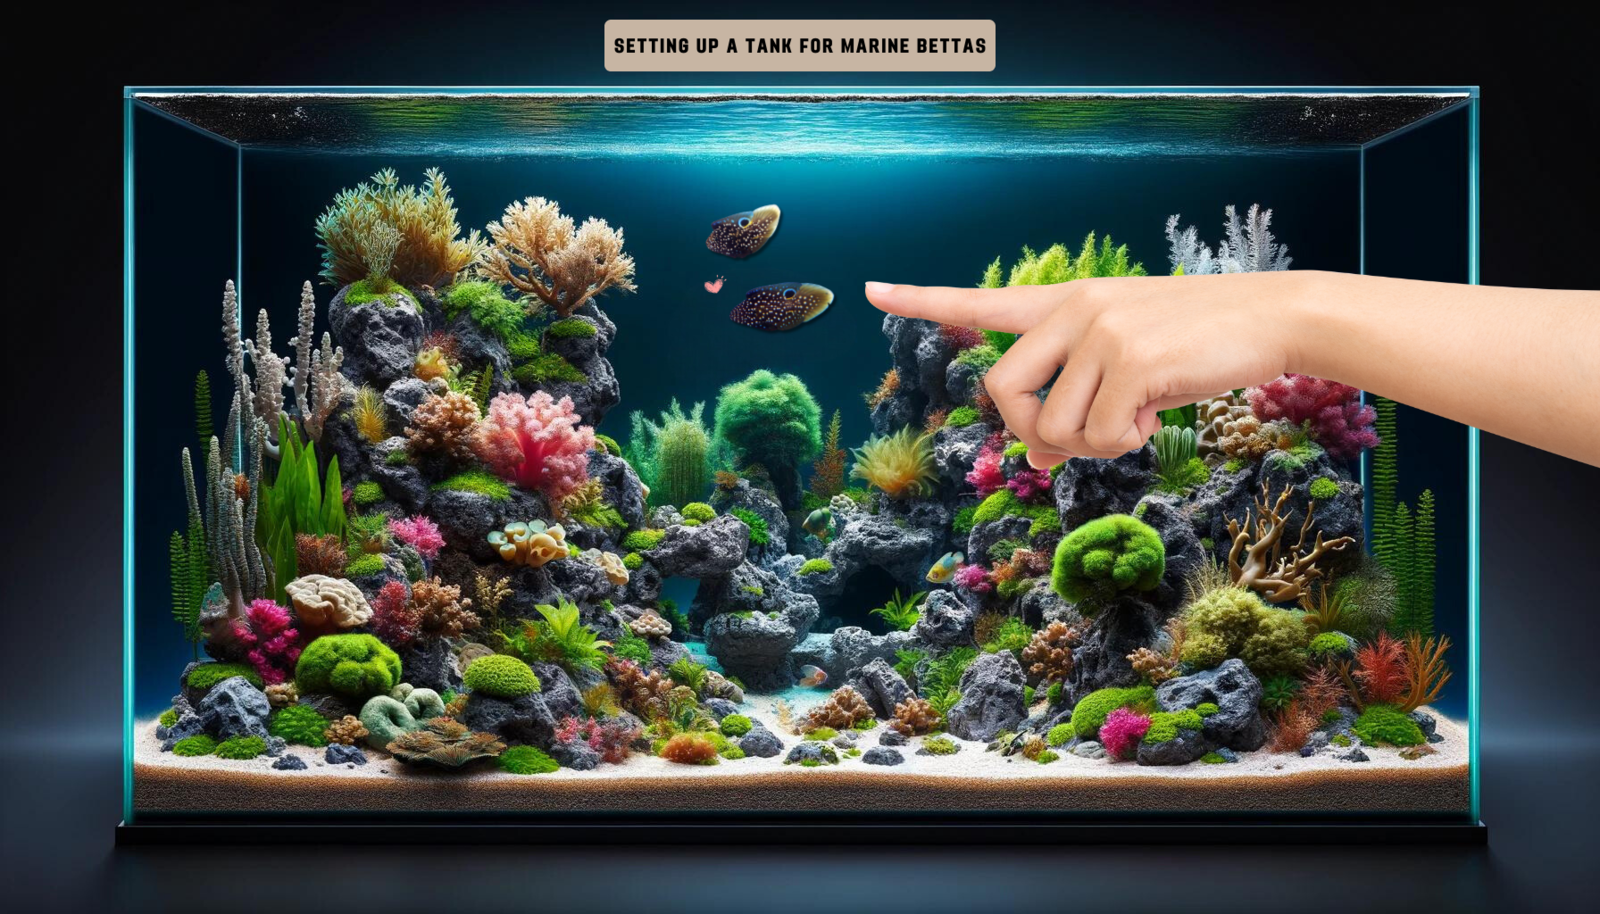 A creatively designed aquarium setup guide for marine Bettas, featuring a finger pointing to the fish and a lush, colorful arrangement of coral and marine plants.